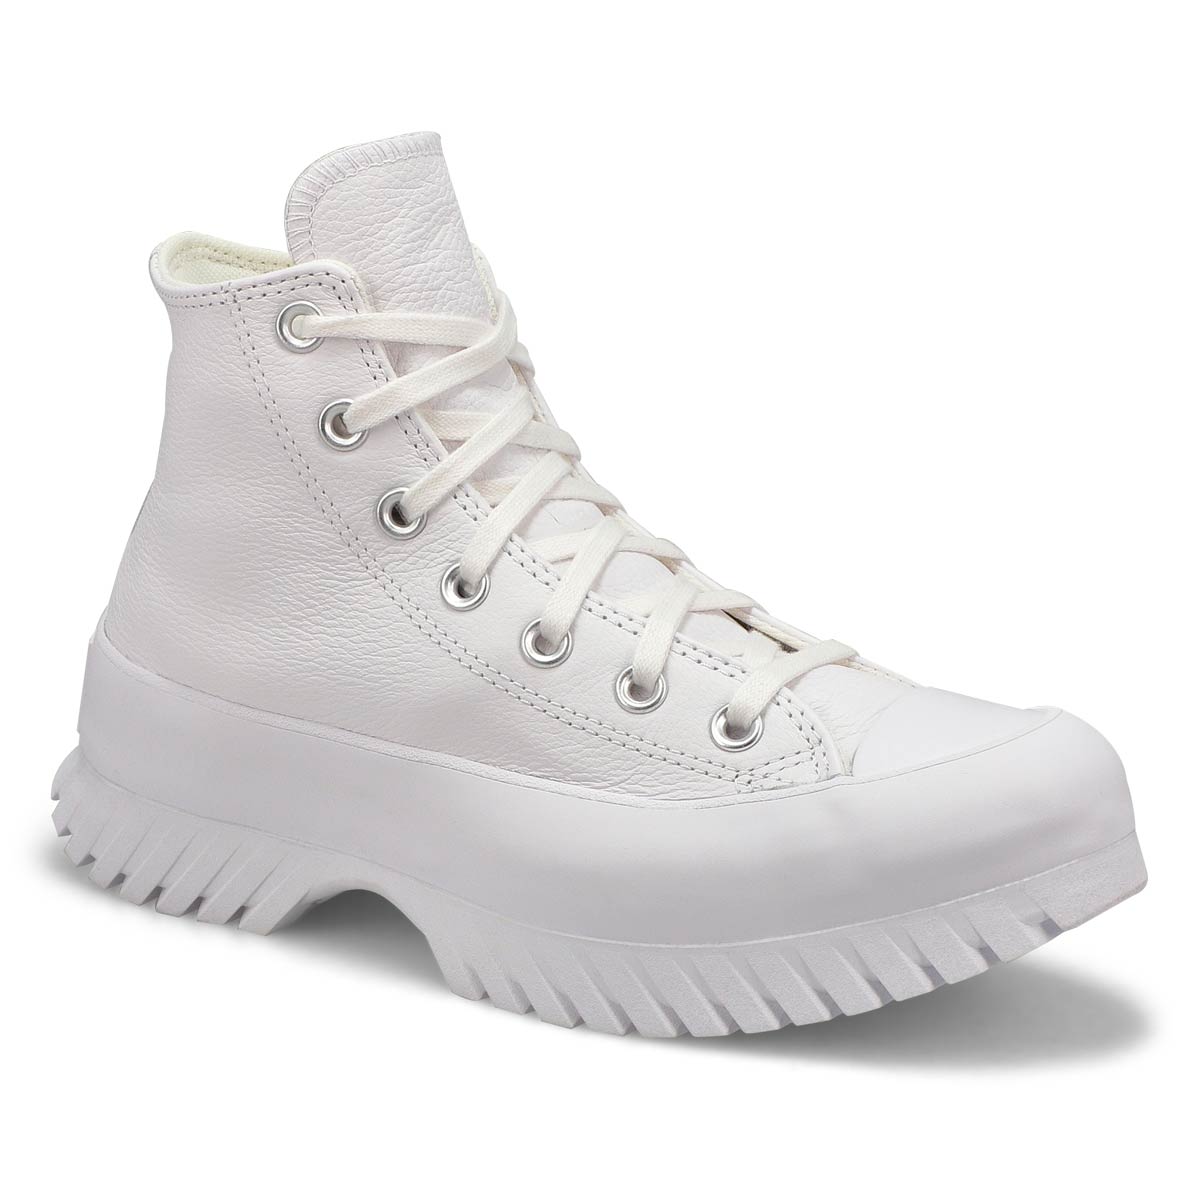 Women's CT All Star Lugged 2.0 Sneaker -White